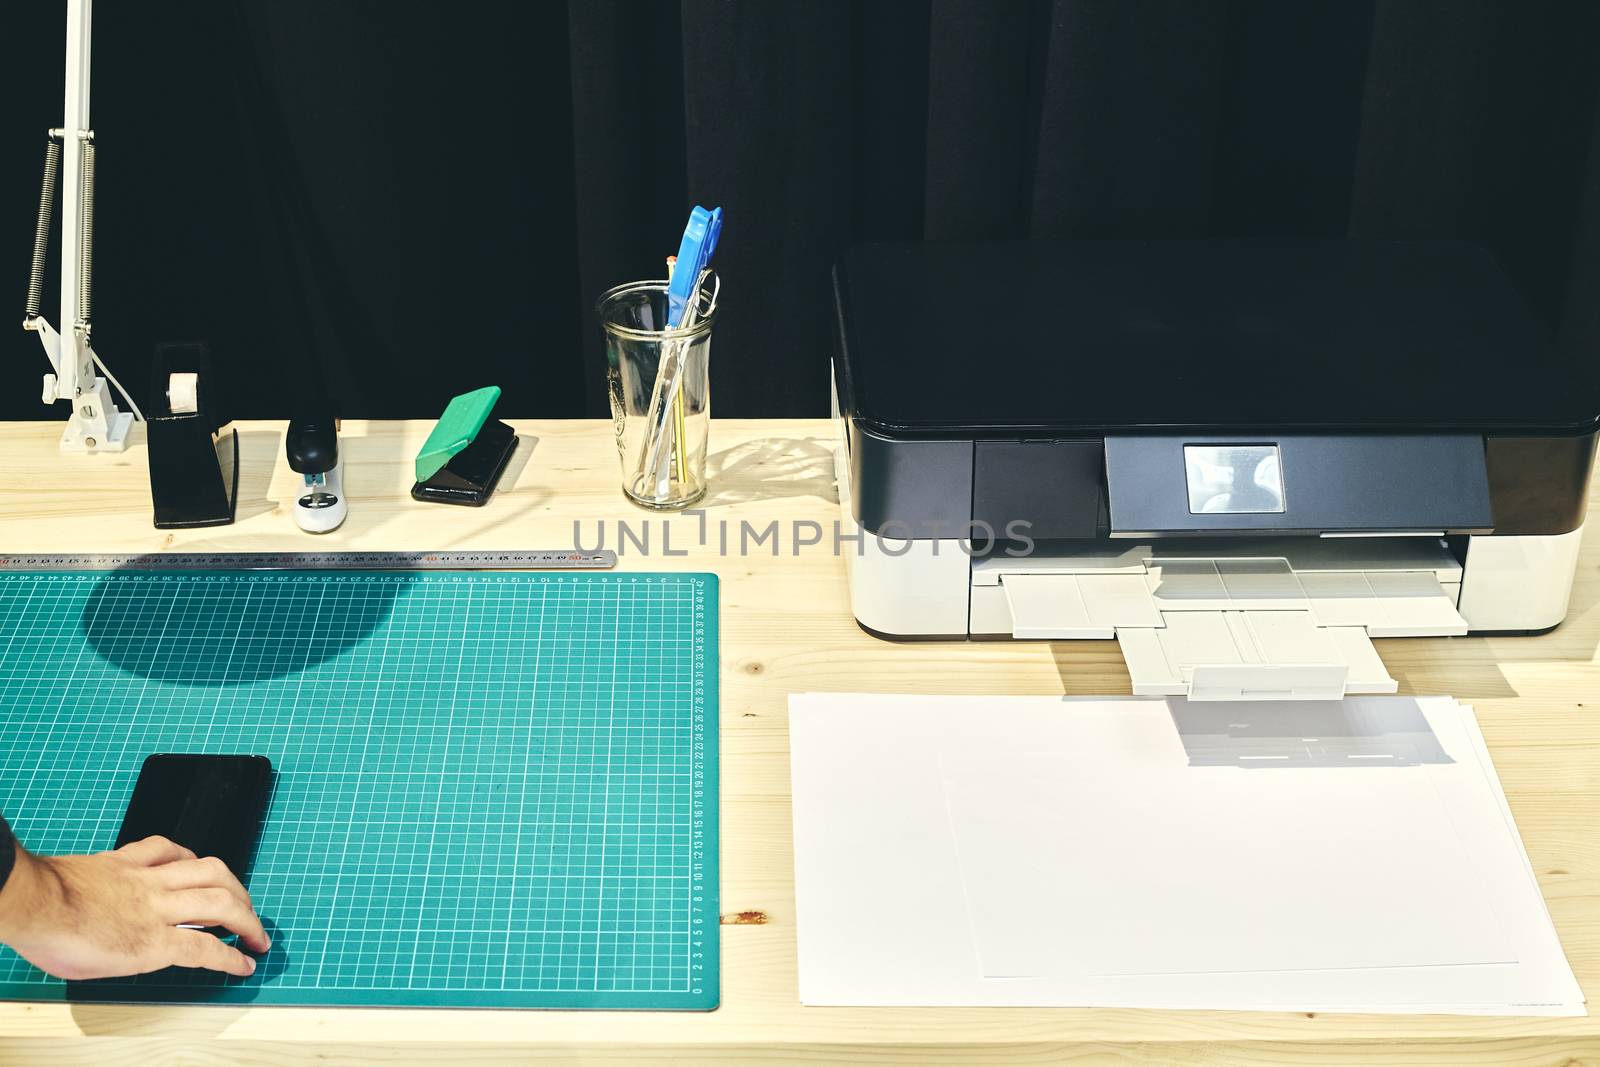 Vision of a desk with its printer and a mobile phone